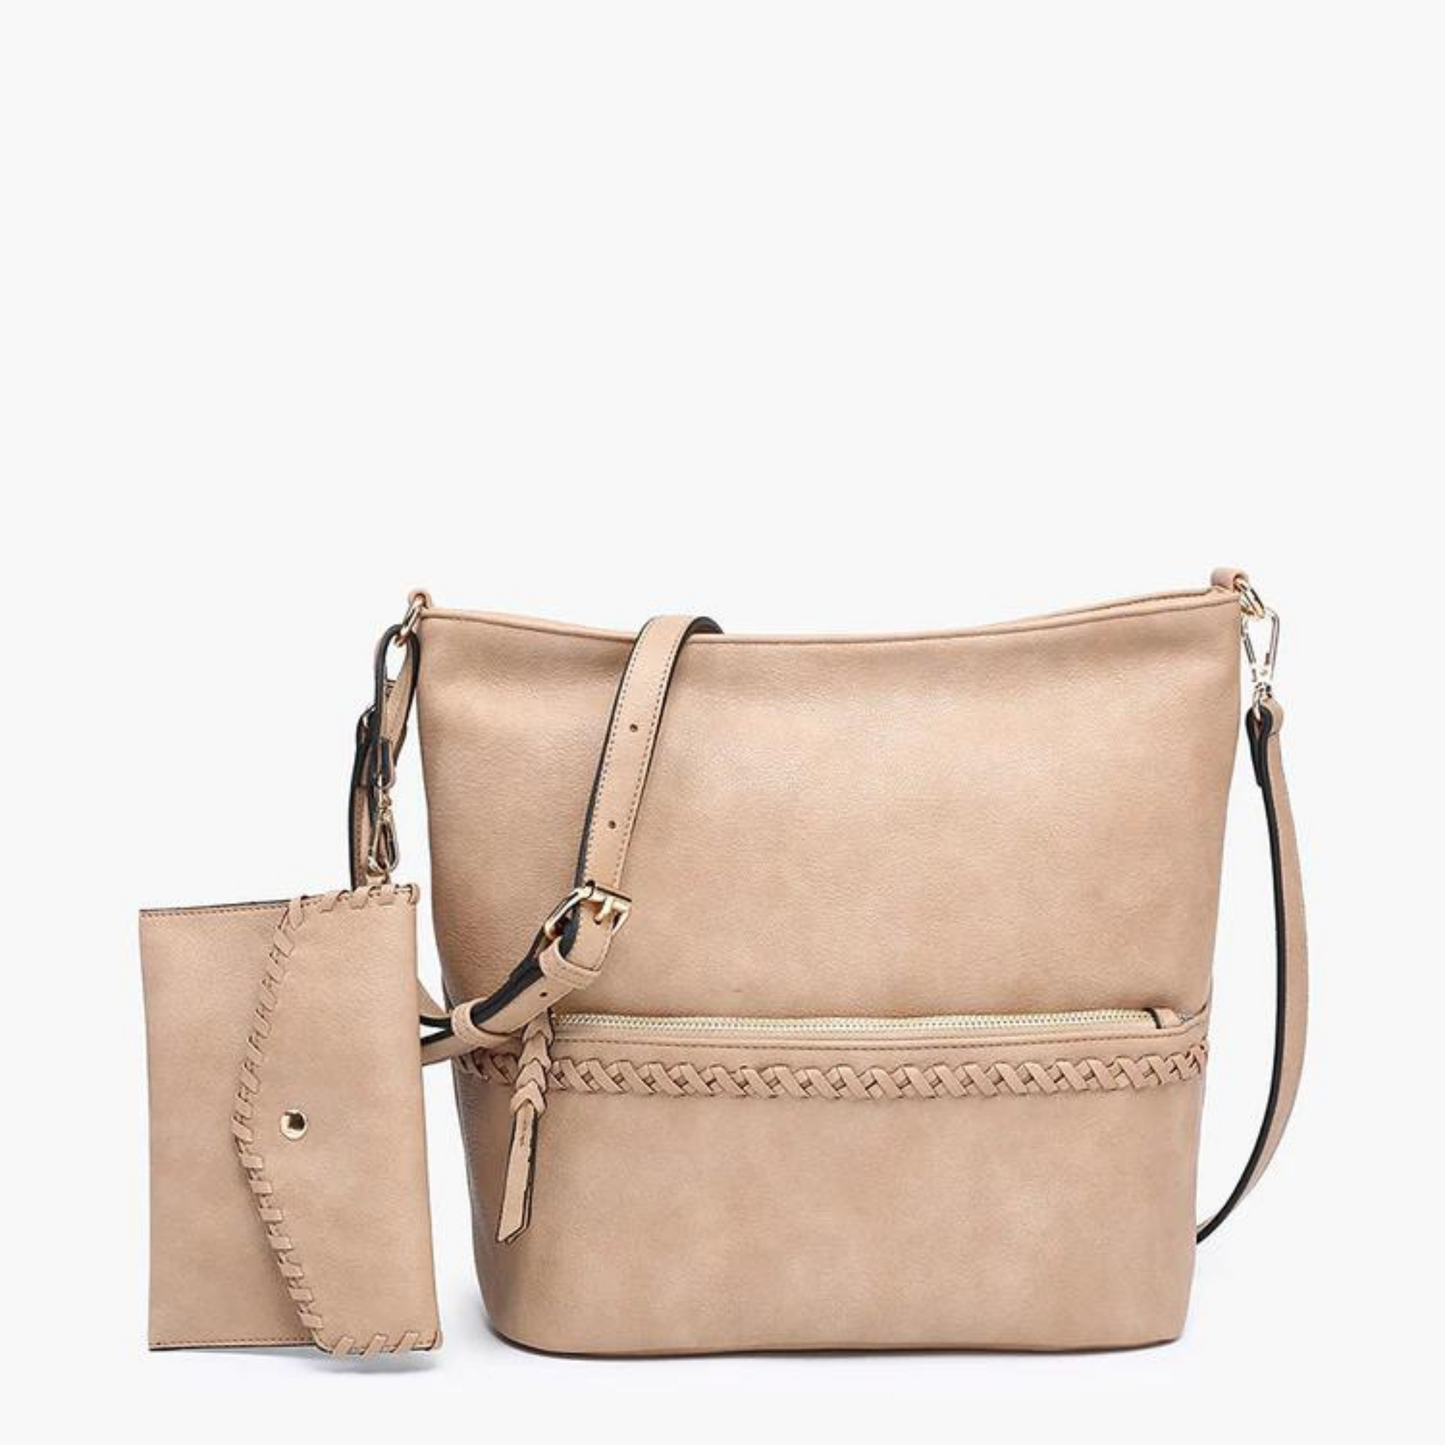 Cynthia distressed whipstitch hobo bag in sand